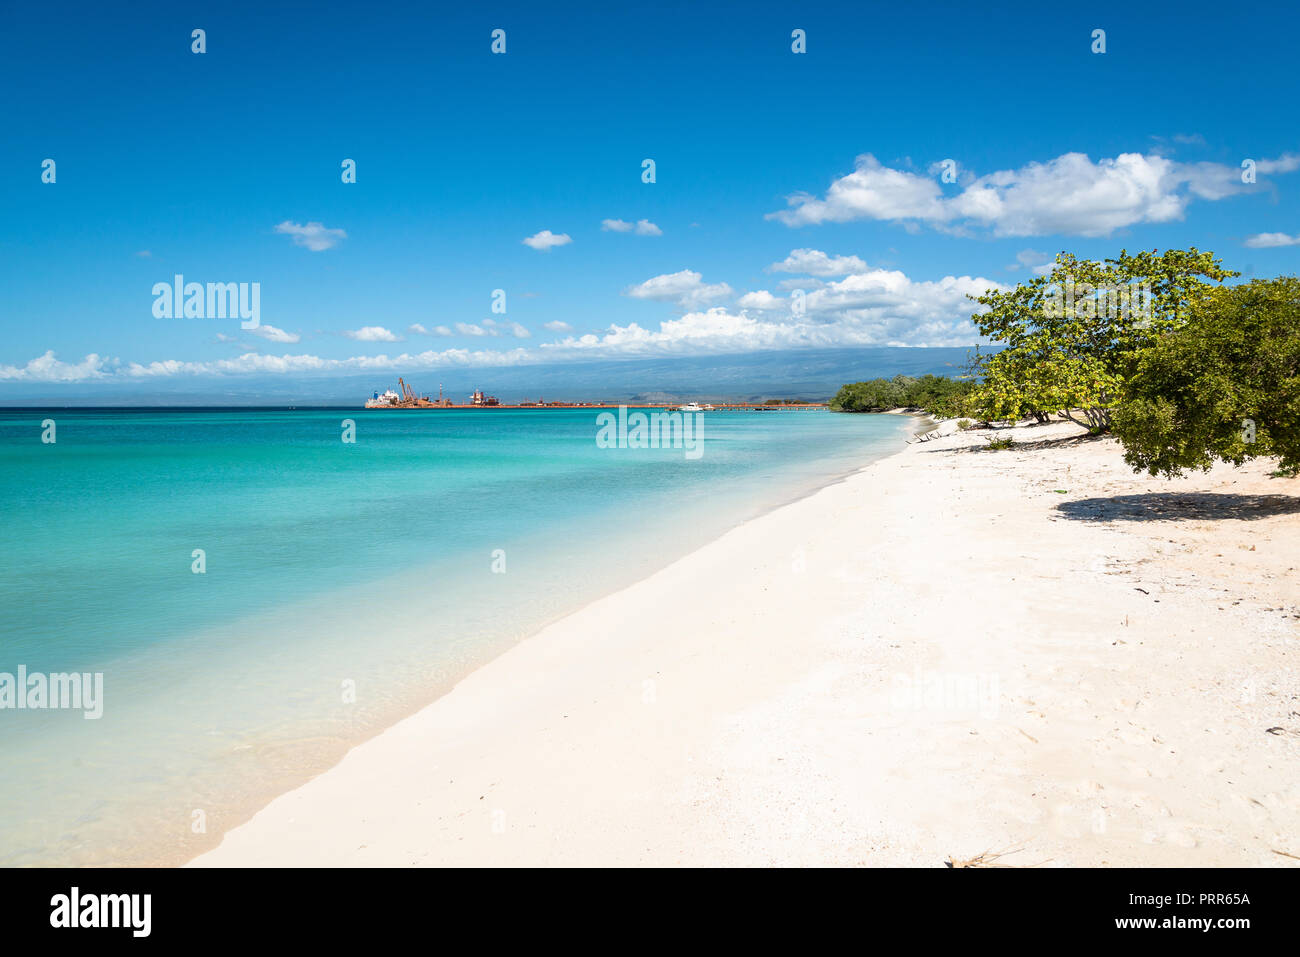 picturesque Beach of 'Playa Cabo Rojo' in the north of 'Bahia de las Aguilas' around Pedernales and Jaragua National park, Dominican Republic Stock Photo